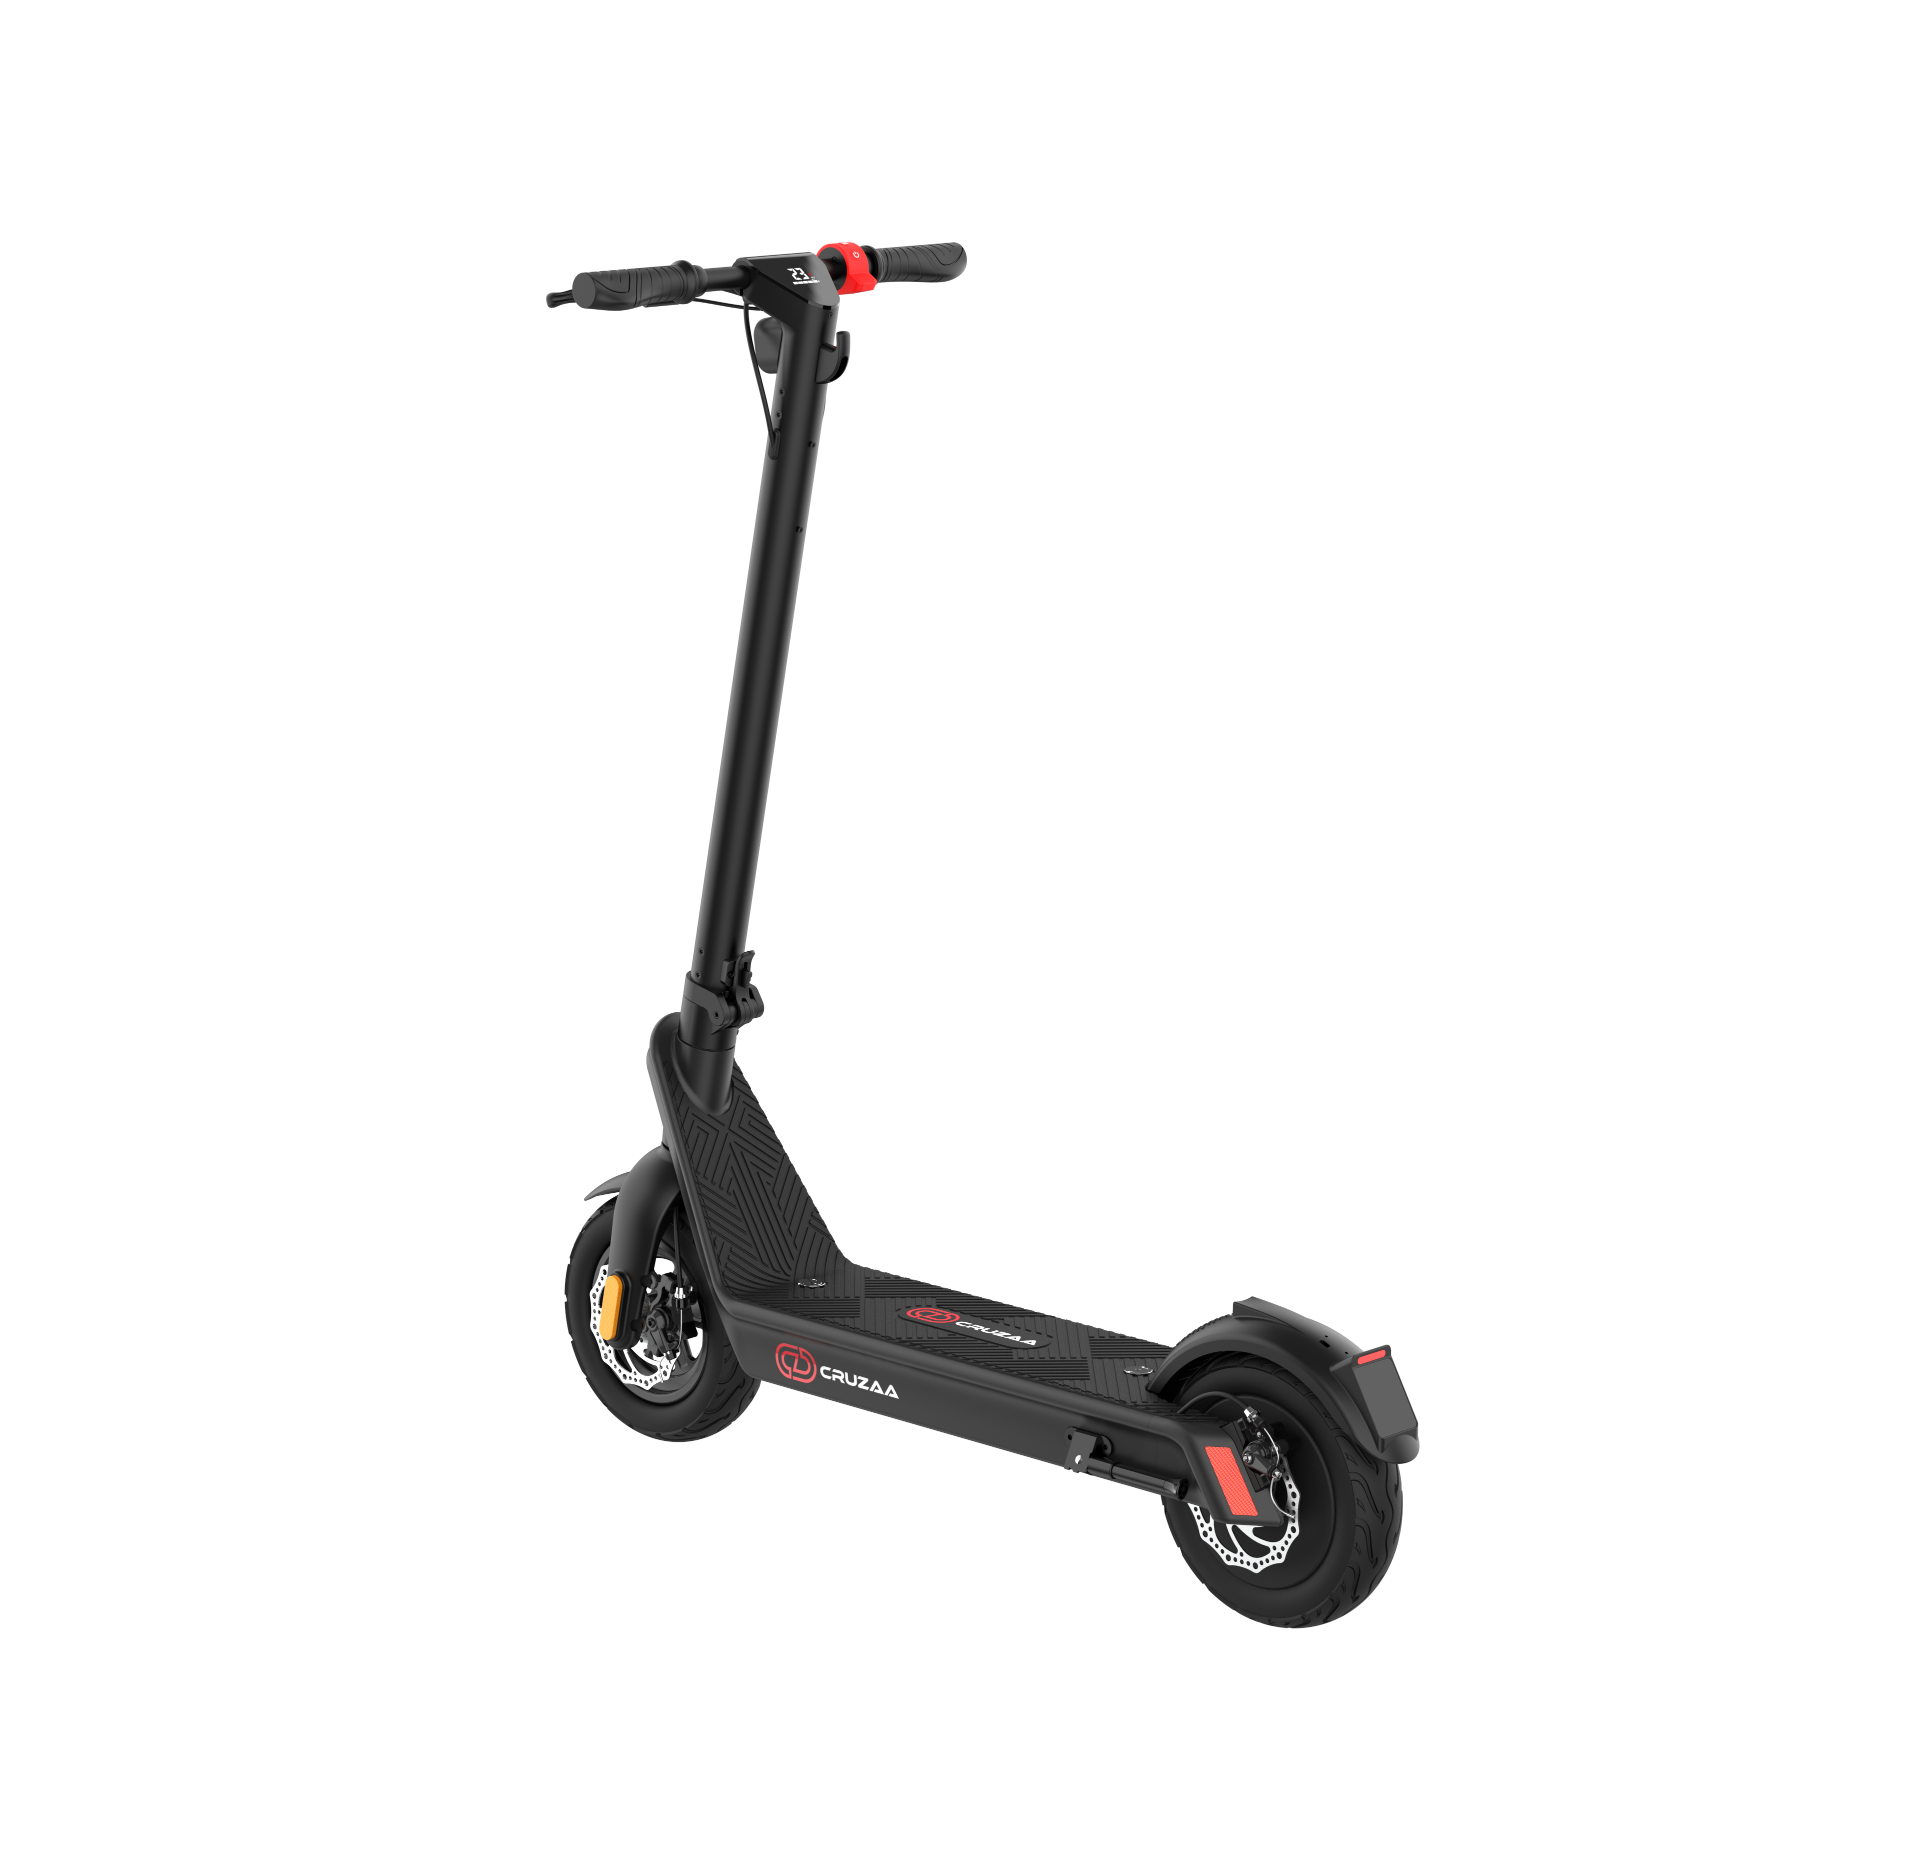 The Commuta Pro Max Electric Foldable Scooter - 75km Range and 40kmh Max Speed.  - ships from UK